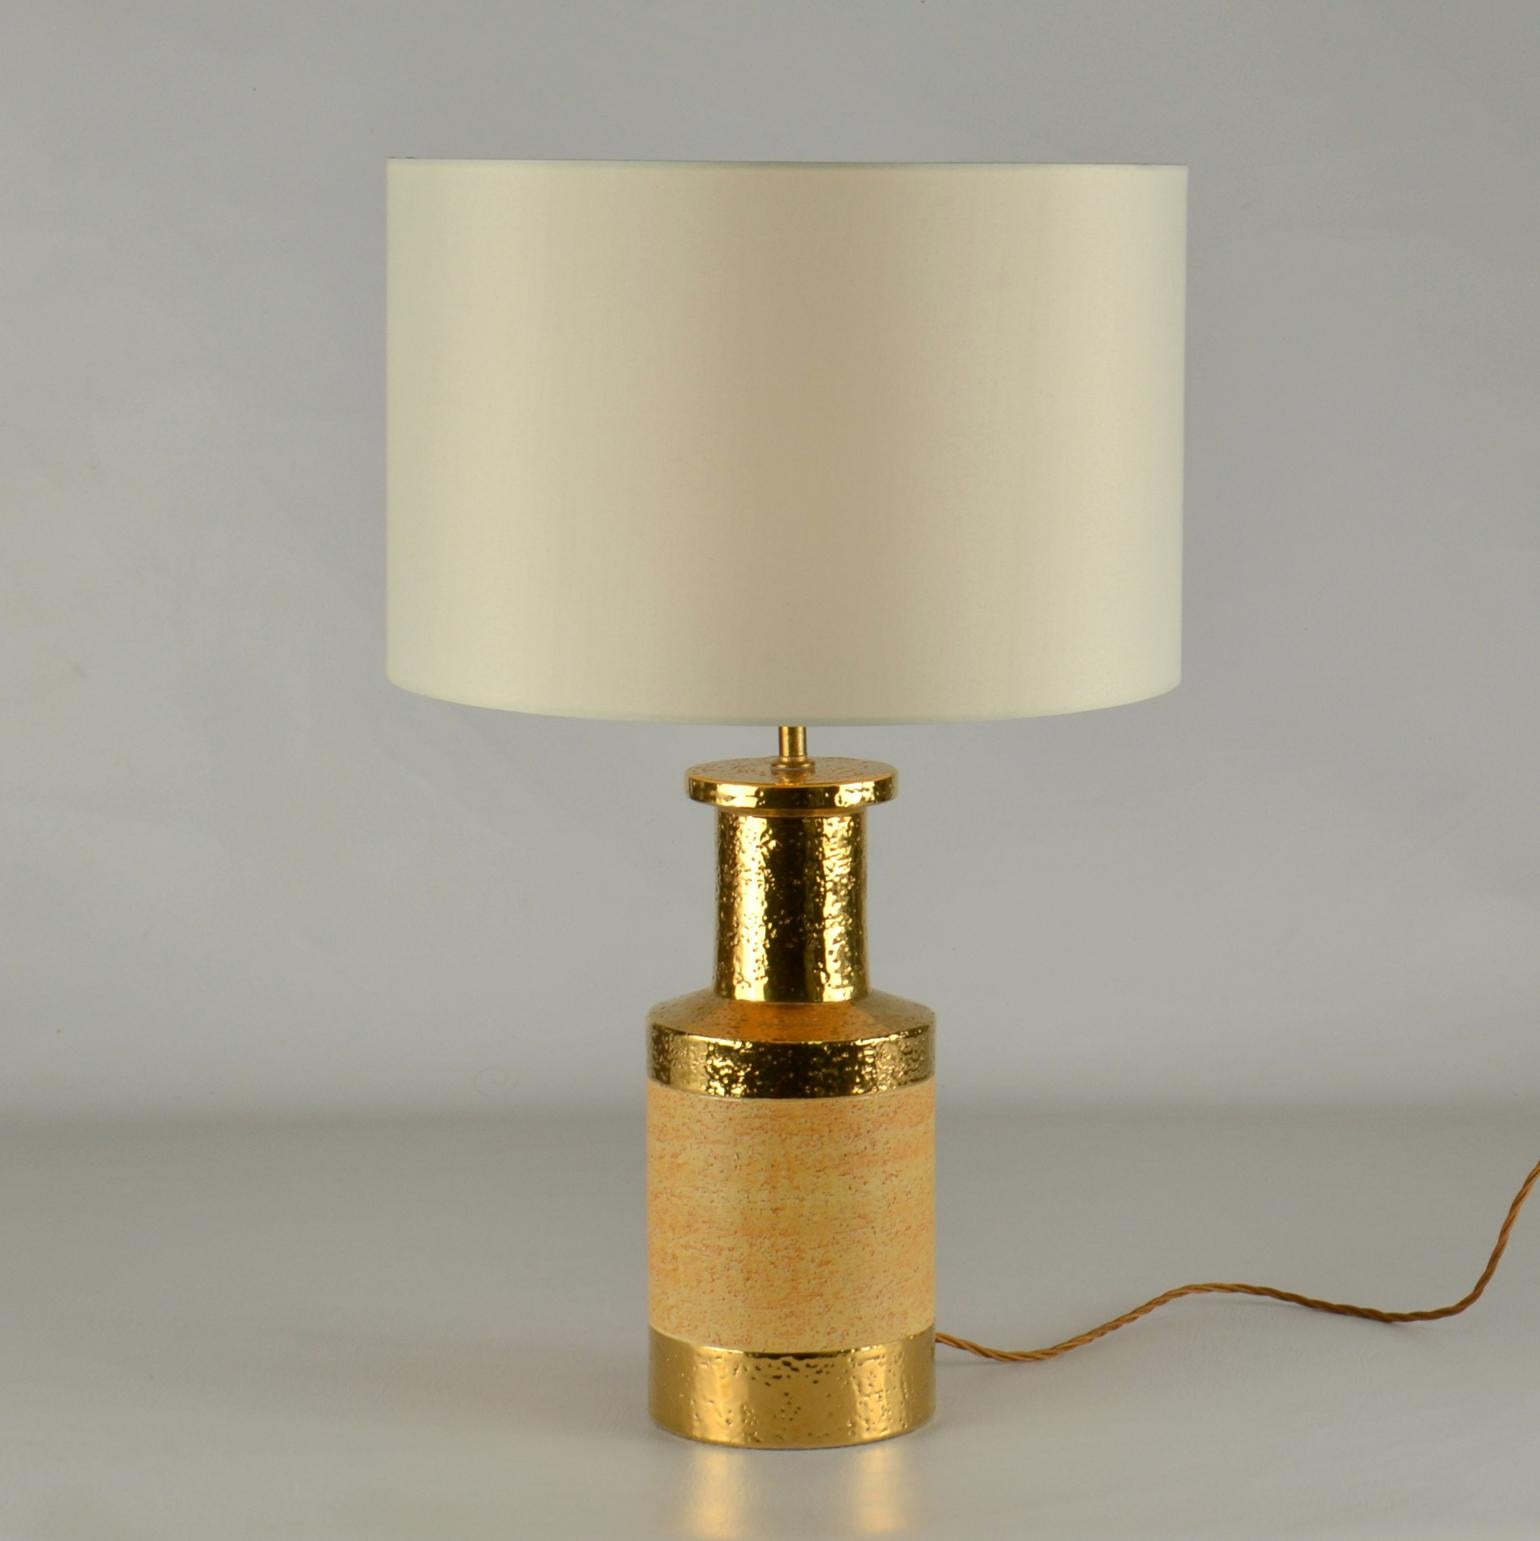 Bitossi cylinder shape table lamps where produced in stoneware with a natural glaze. The border at the neck is gilded, the band of shiny gold emphasis the rough texture of the ceramic body.
Guido Bitossi established his own ceramic workshop near